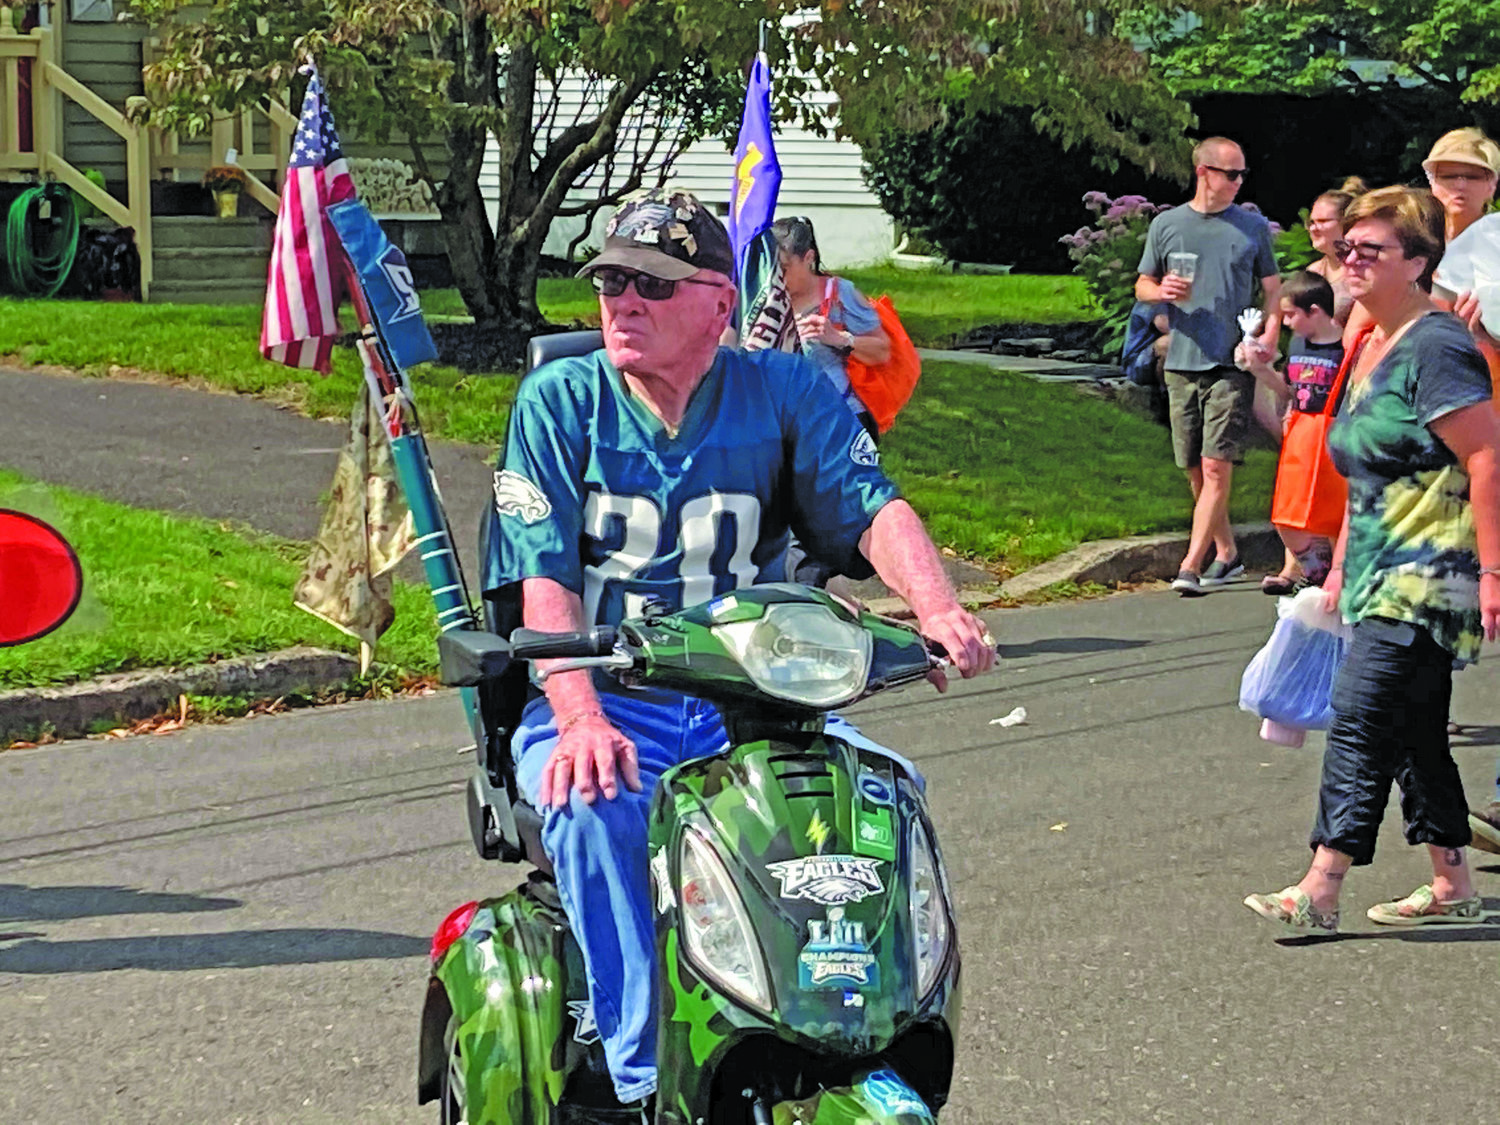 Big Eagles fan Bob Maylie surveys the crowd in his Birds-themed motorized cart during Harvest Day in Yardley Borough.